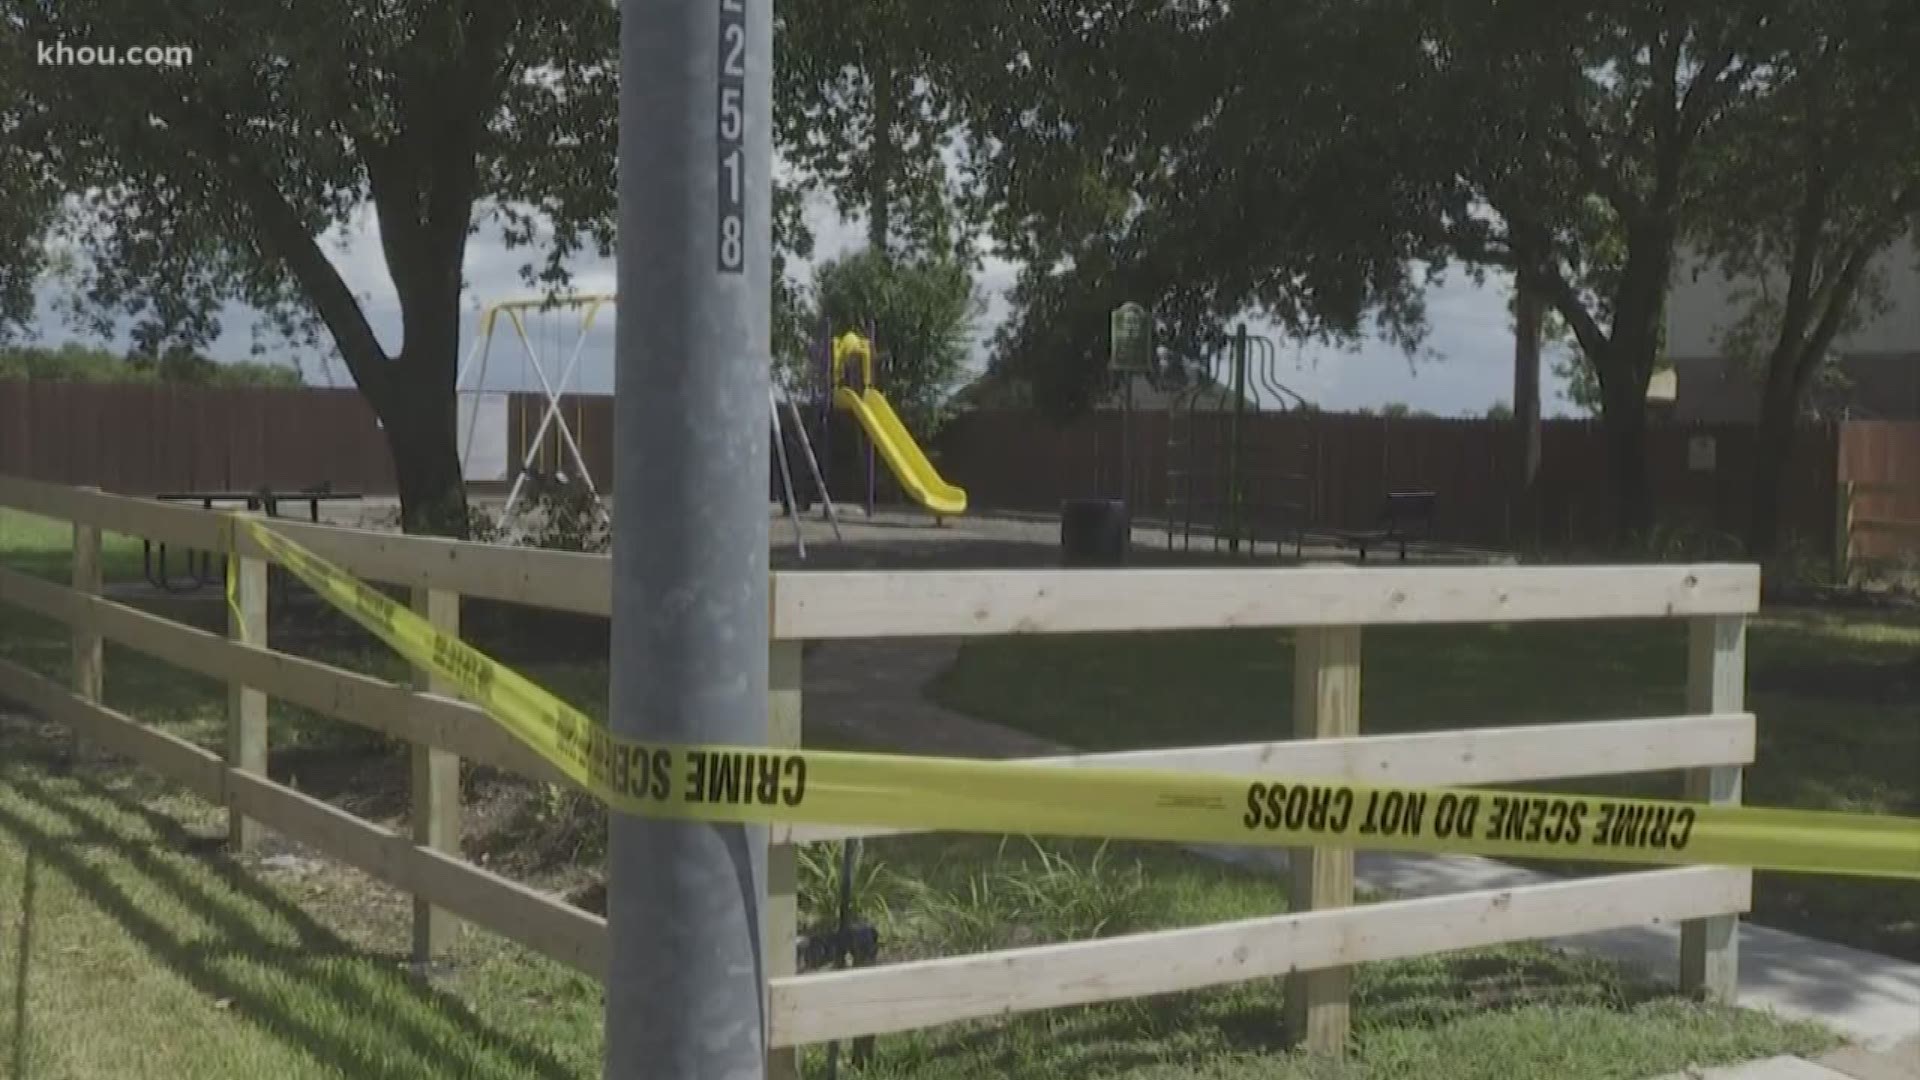 A teenager who was shot Thursday afternoon near the Greatwood community has died, according to the Fort Bend County Sheriff's Office. 
The 16-year-old victim was shot in the face and back at Savannah Moss Park in the 400 block of Macek Rd.